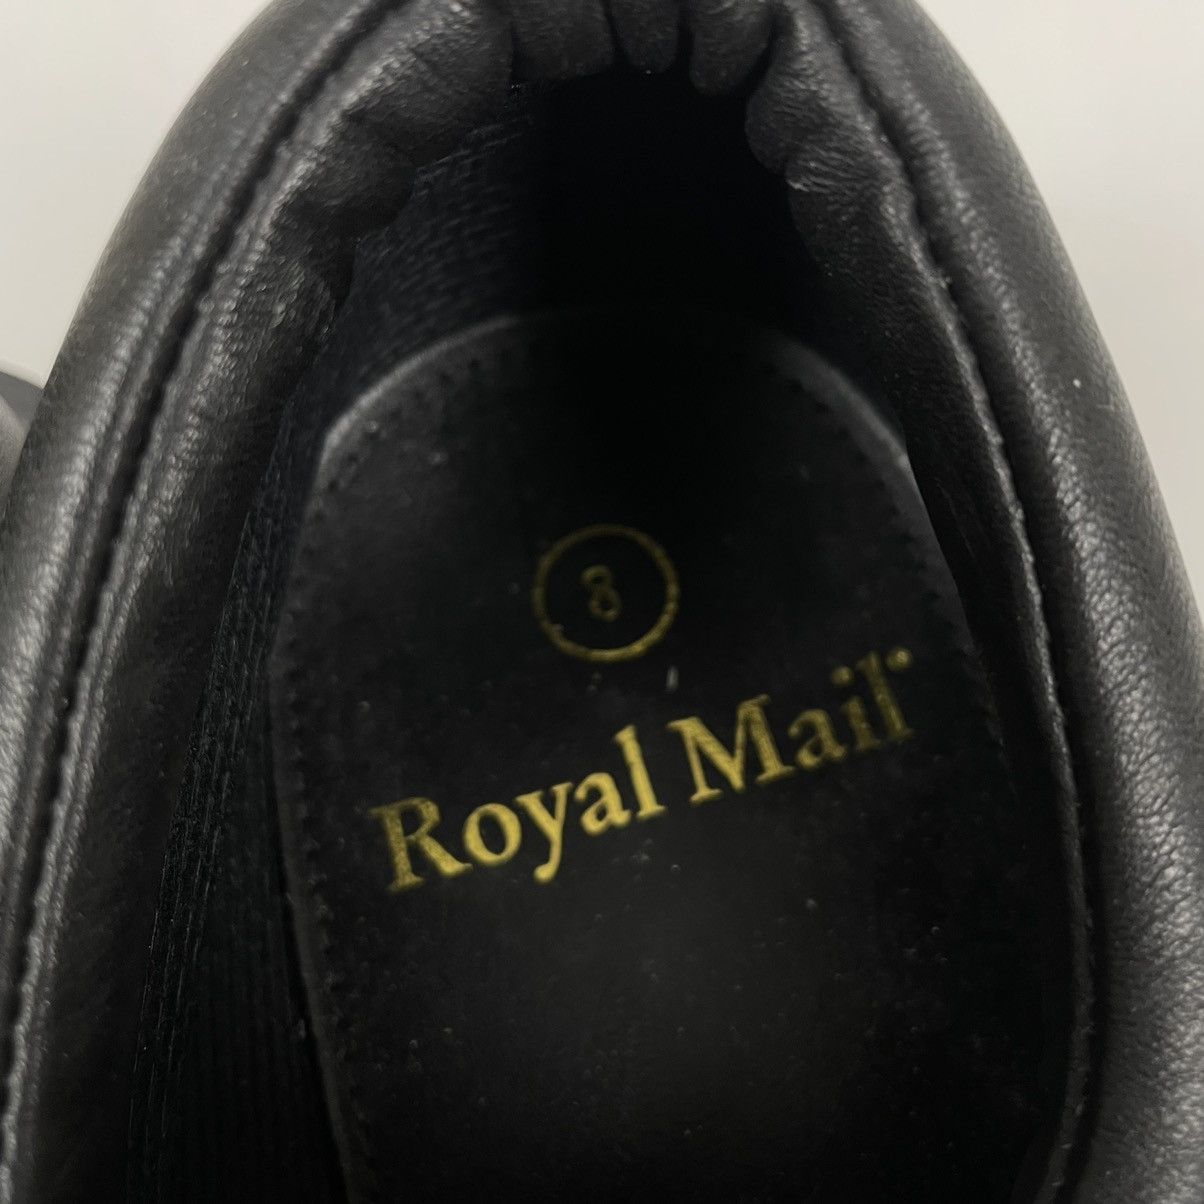 Dr. Martens Vintage Dr. Martens Royal Mail Shoes Made in England Size US 9 / EU 42 - 11 Thumbnail